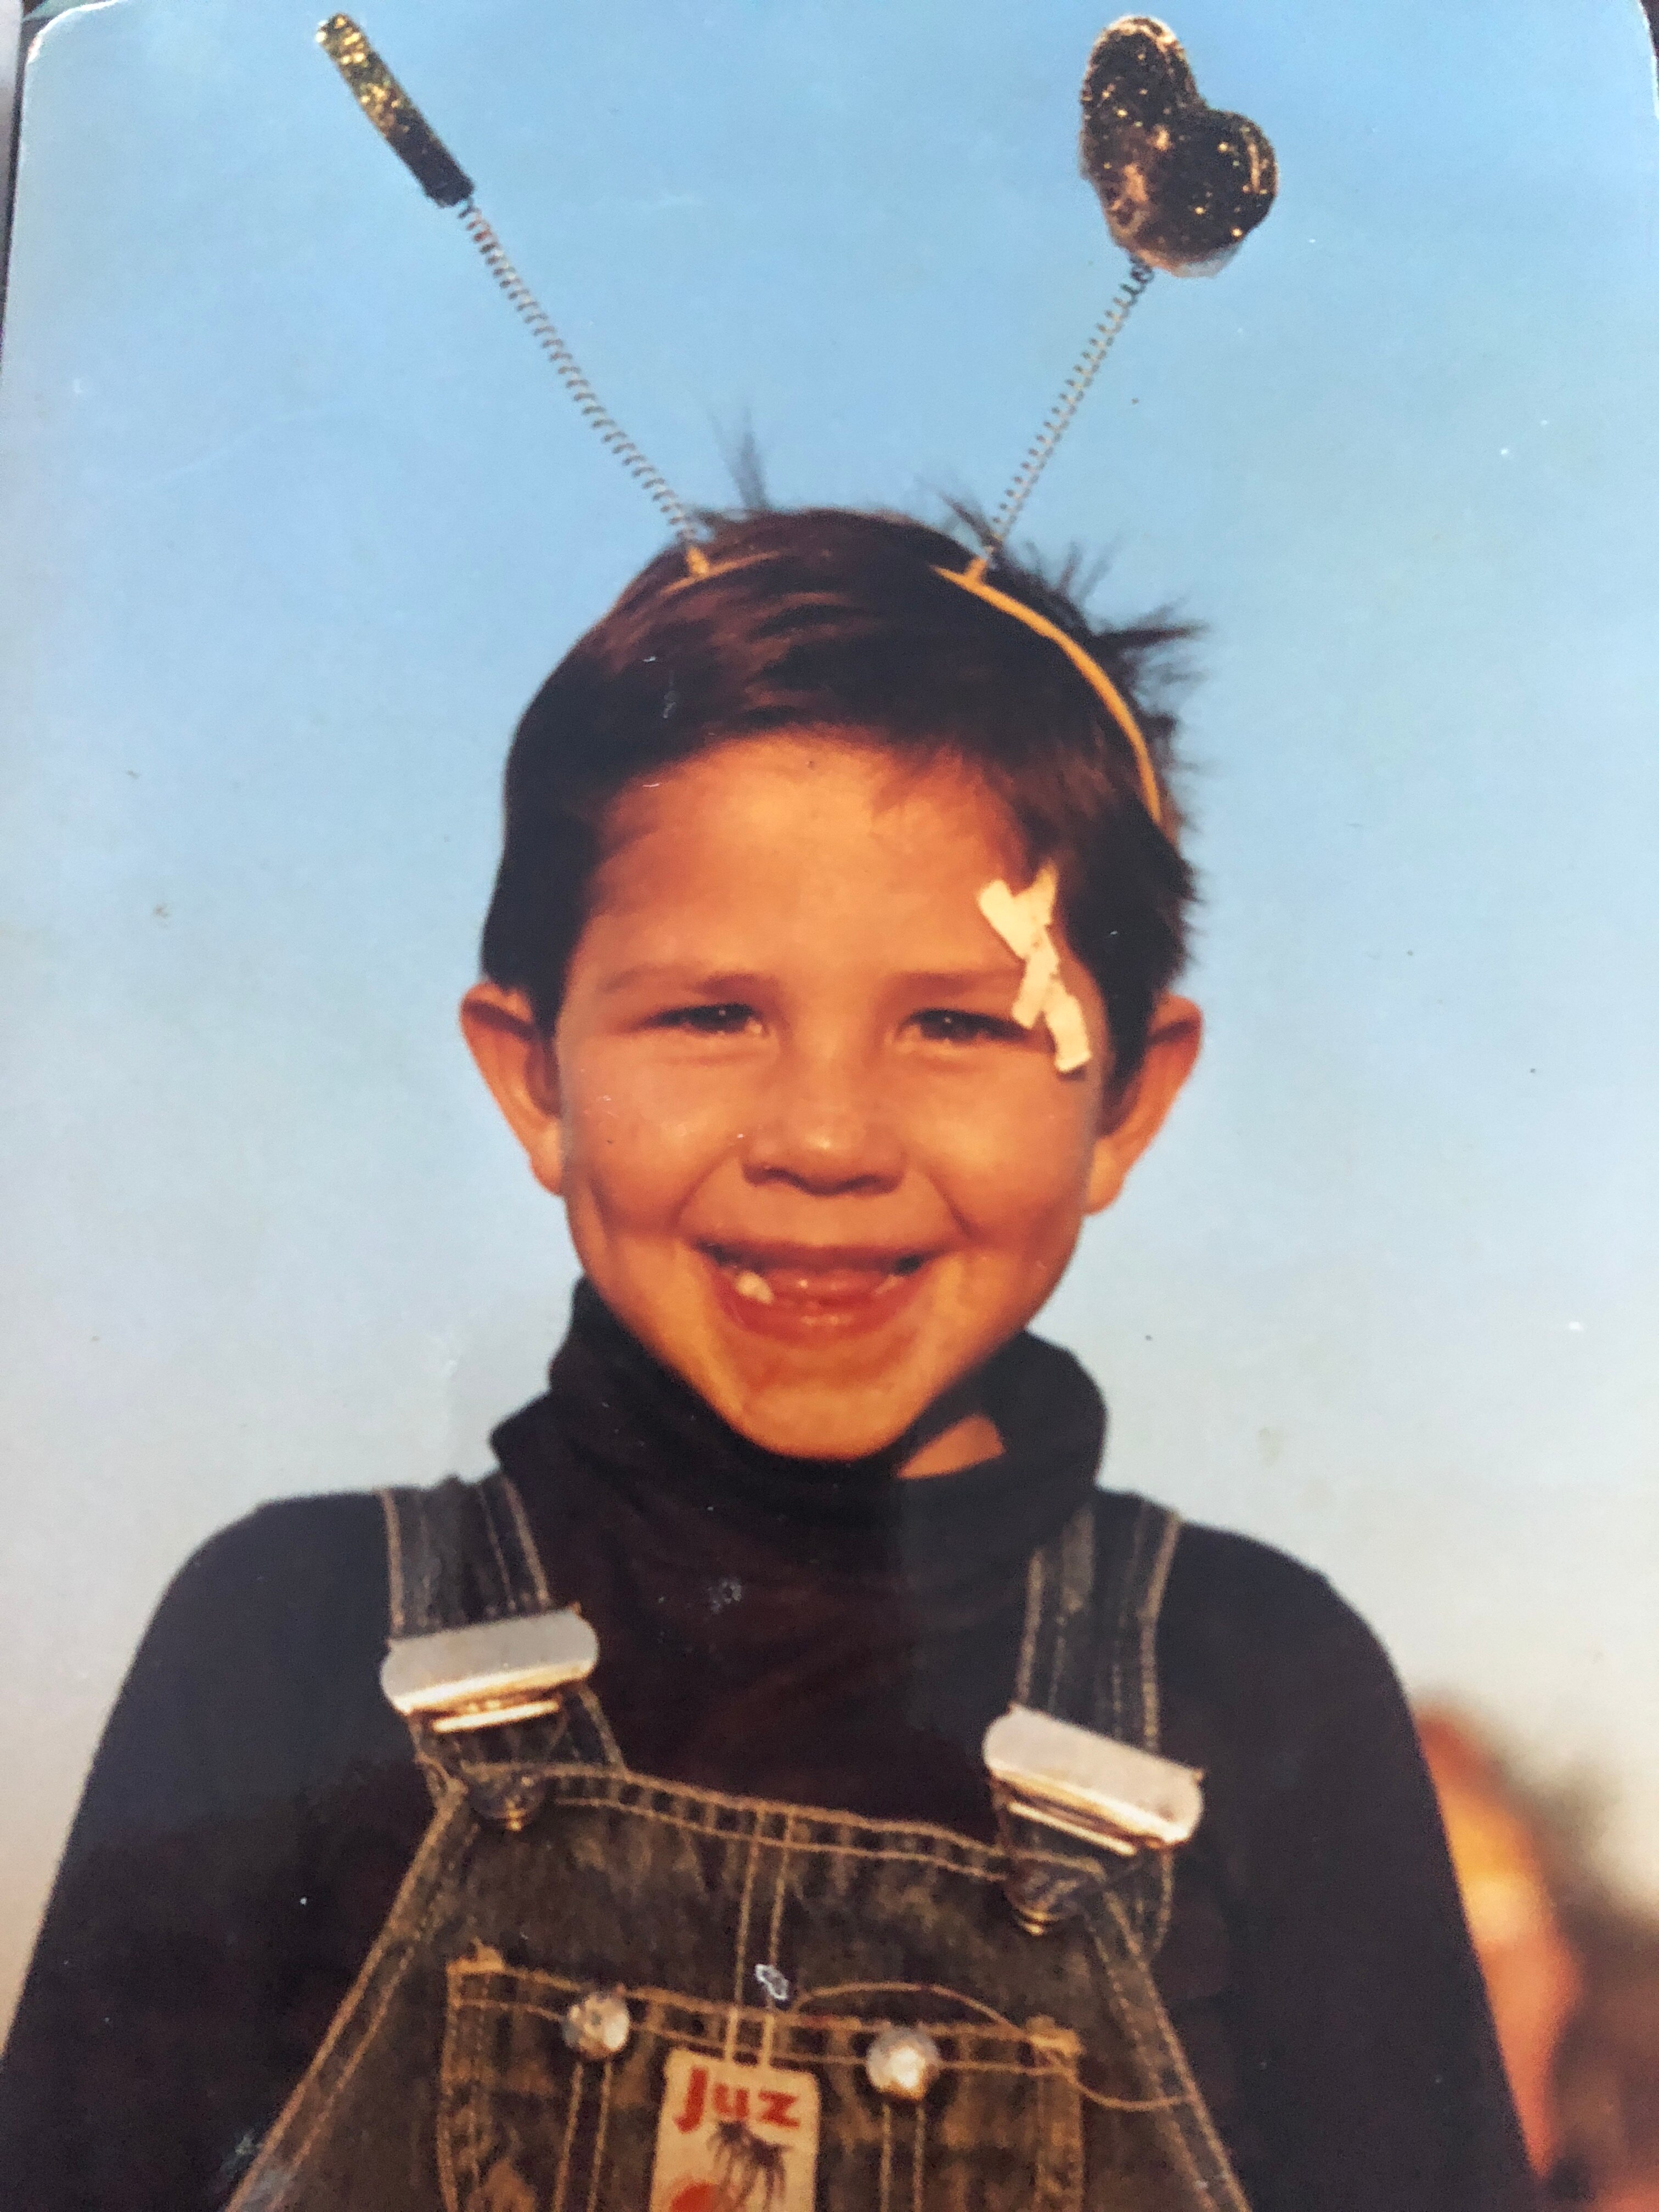 A young Daniel smiles at the camera wearing toy antennas 